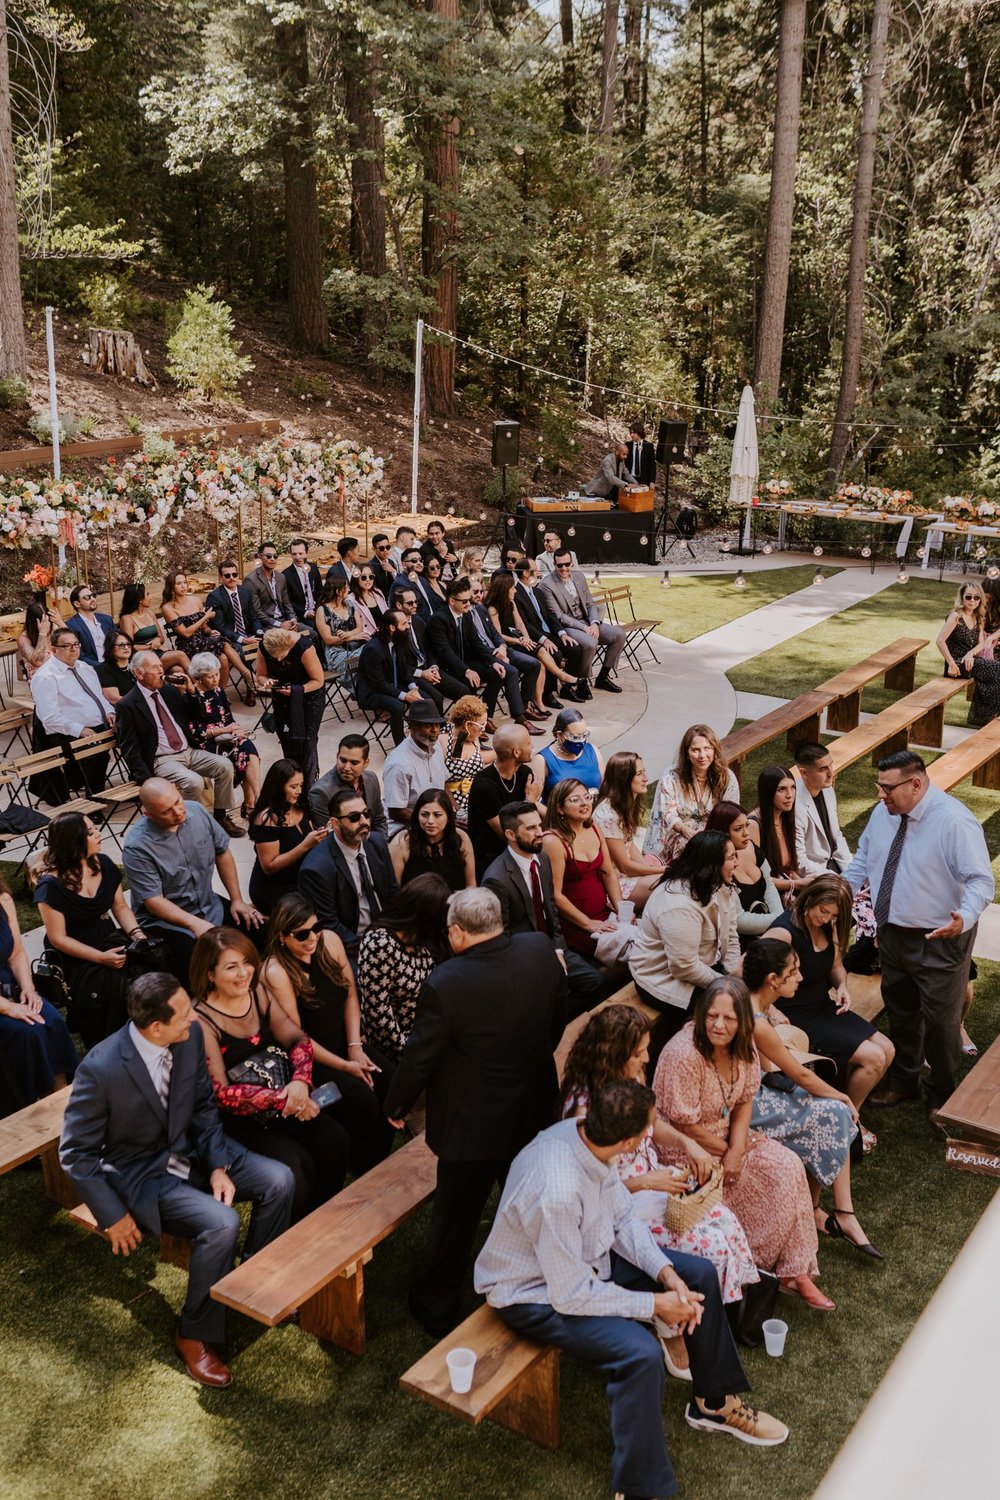 Castle in the Forest Lake Arrowhead Wedding Ceremony Set Up, Guests seated on long benches,  Photo by Tida Svy